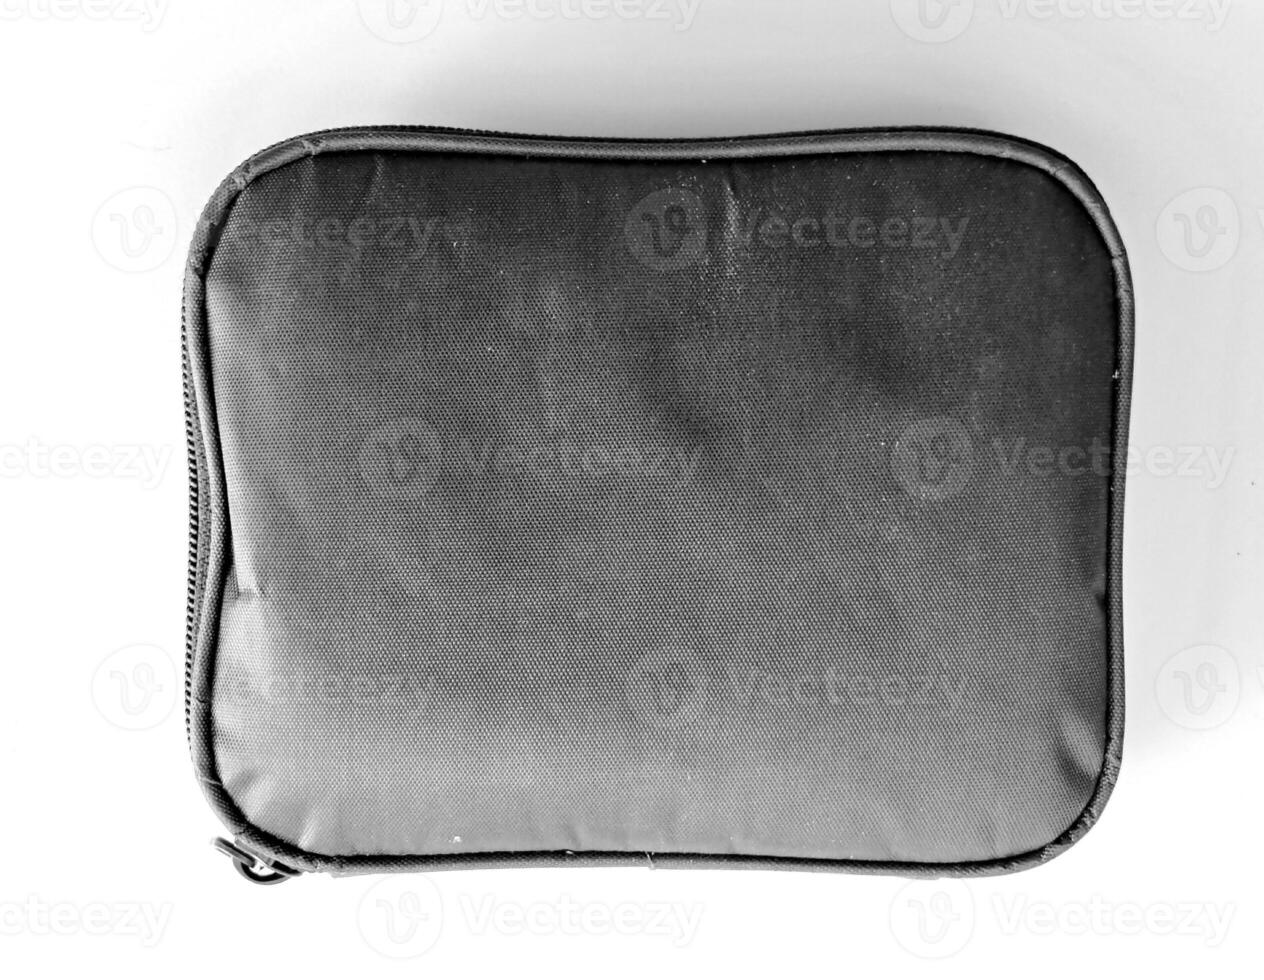 Pouch or bag fabric with gray color on white background photo